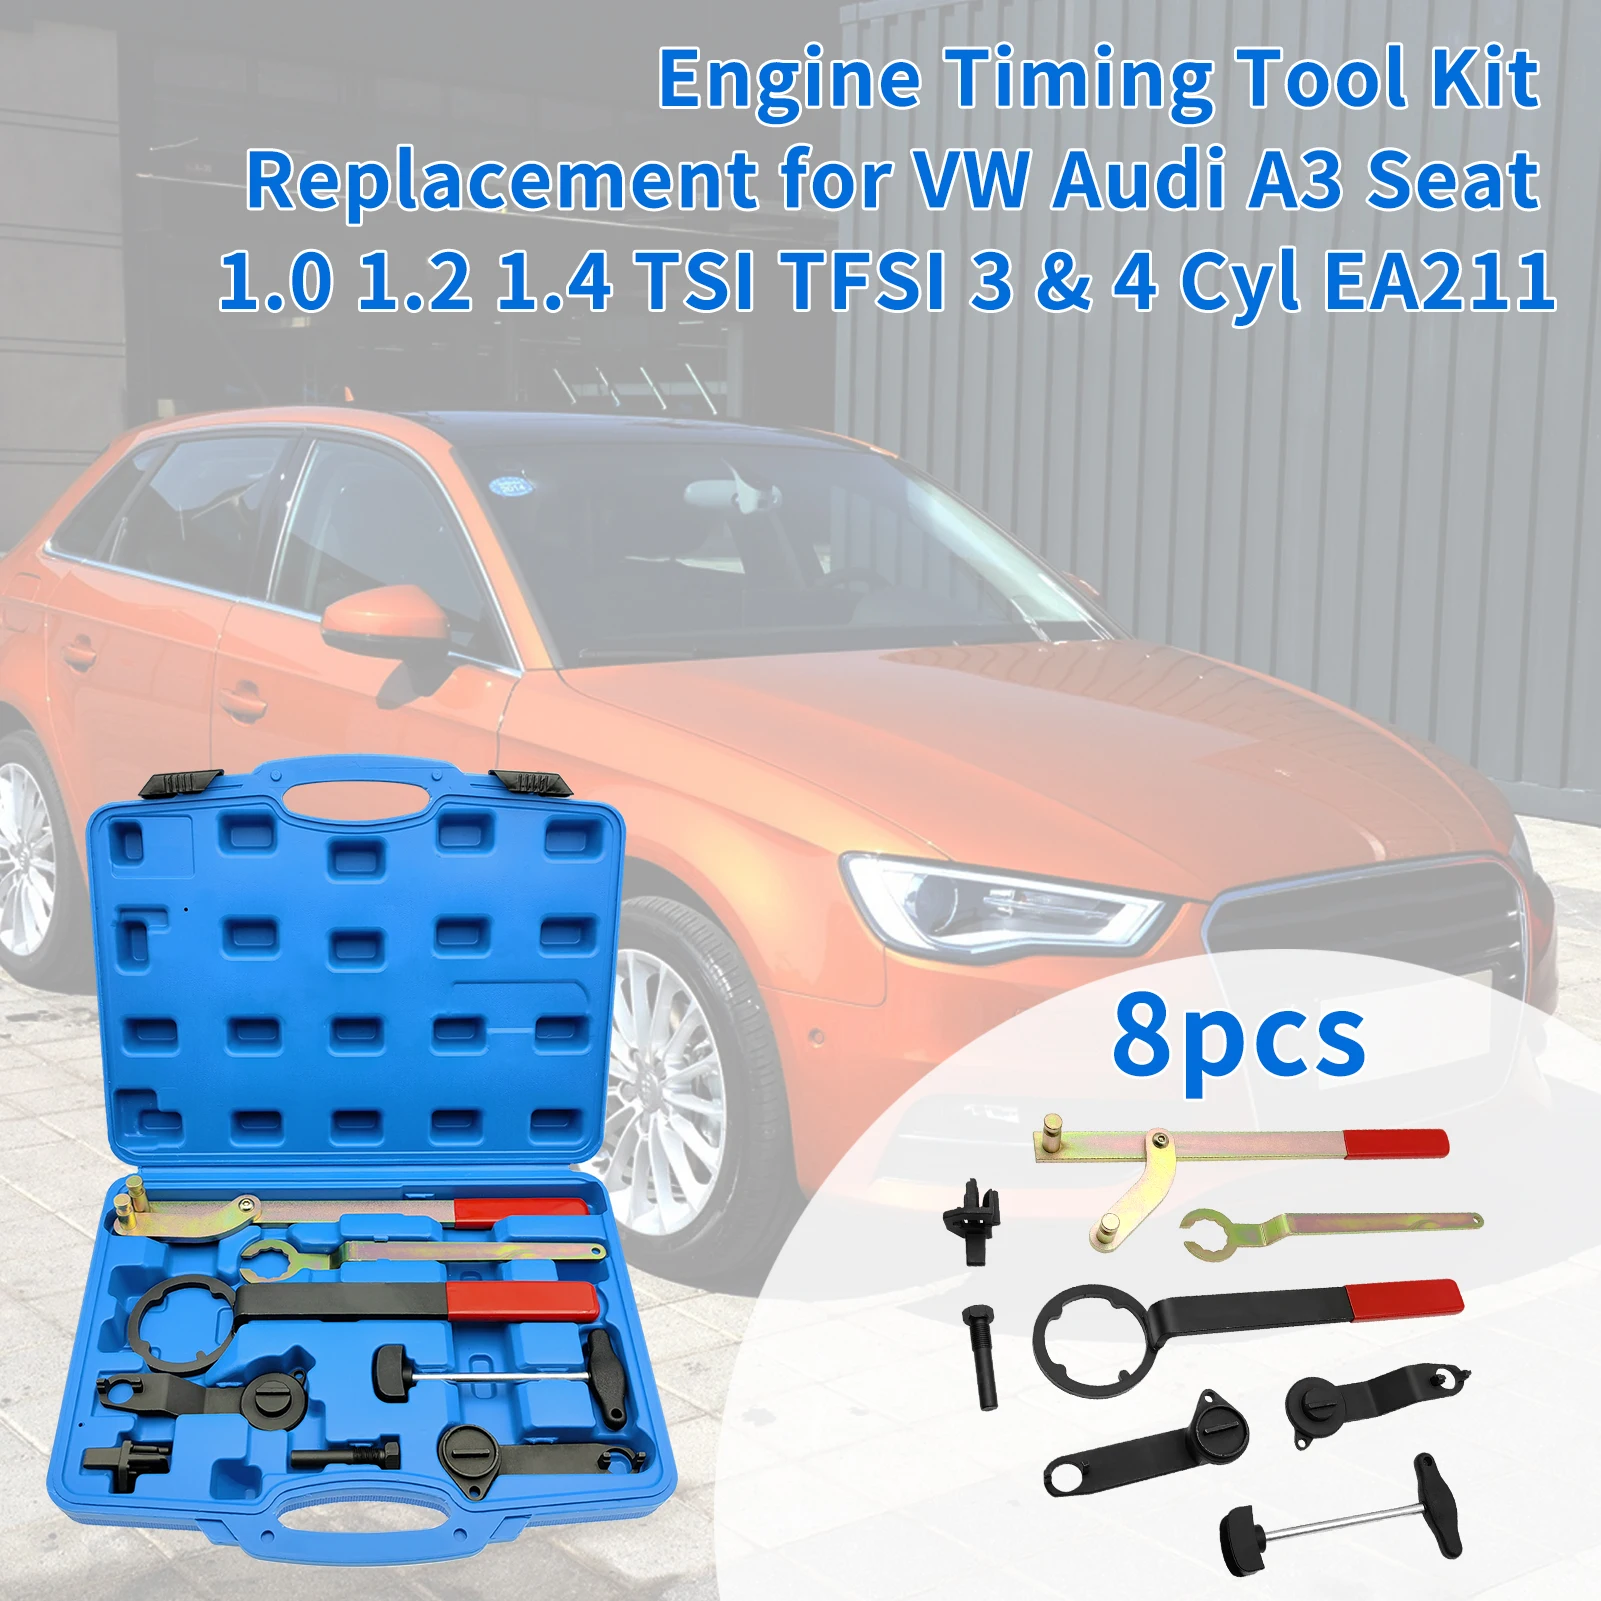 

Engine Timing Tool Kit Replacement for VW Audi A3 Seat 1.0 1.2 1.4 TSI TFSI 3 & 4 Cyl EA211